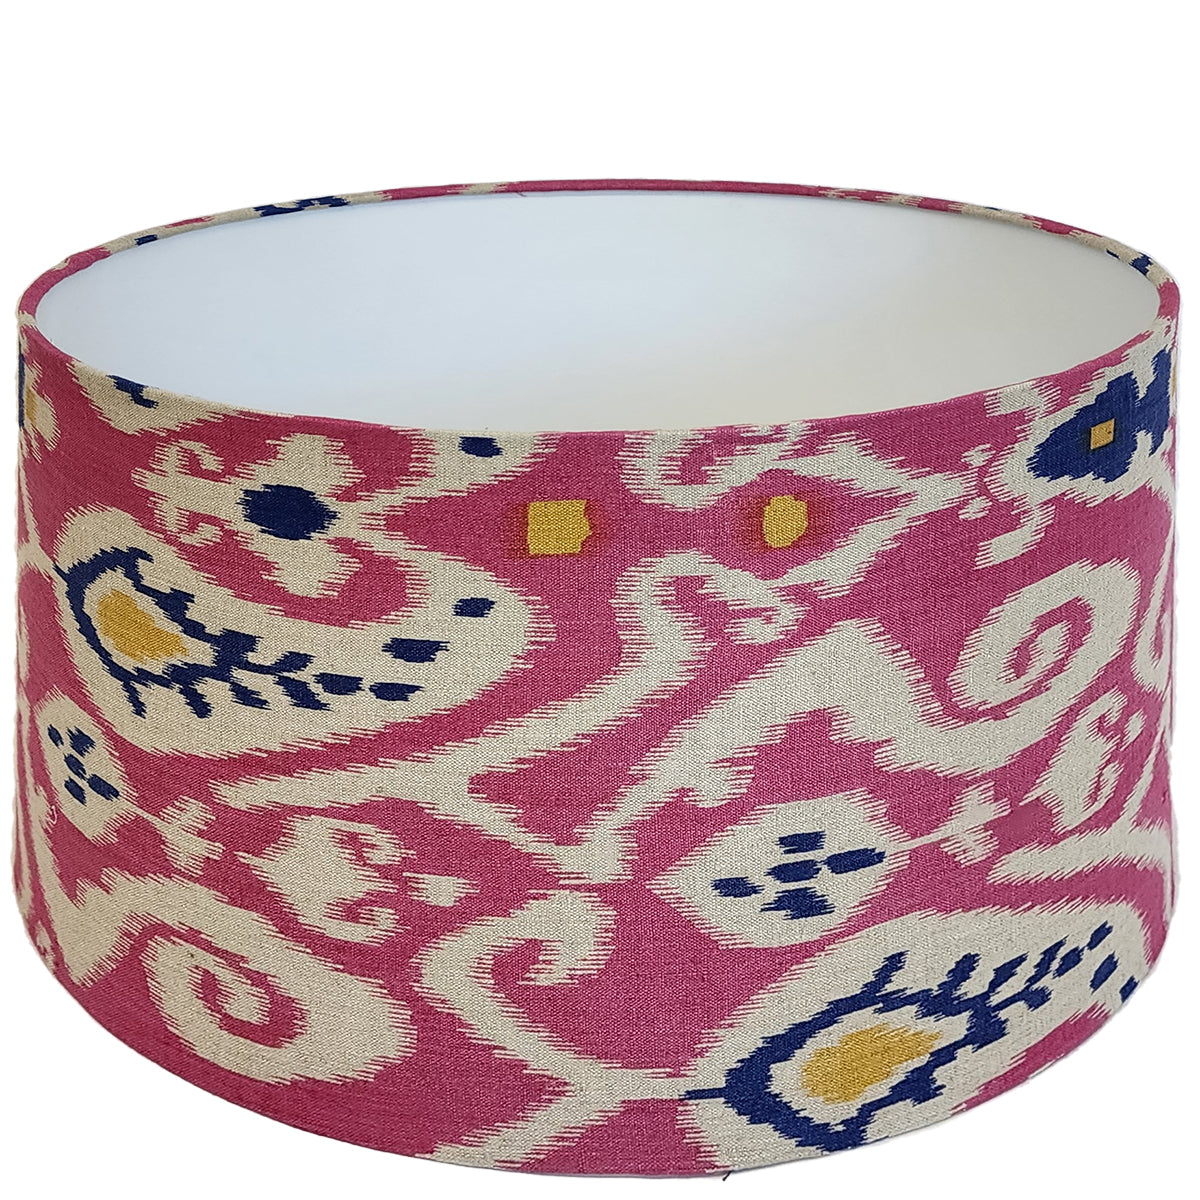 Indonesian Ikat style linen lamp - pink